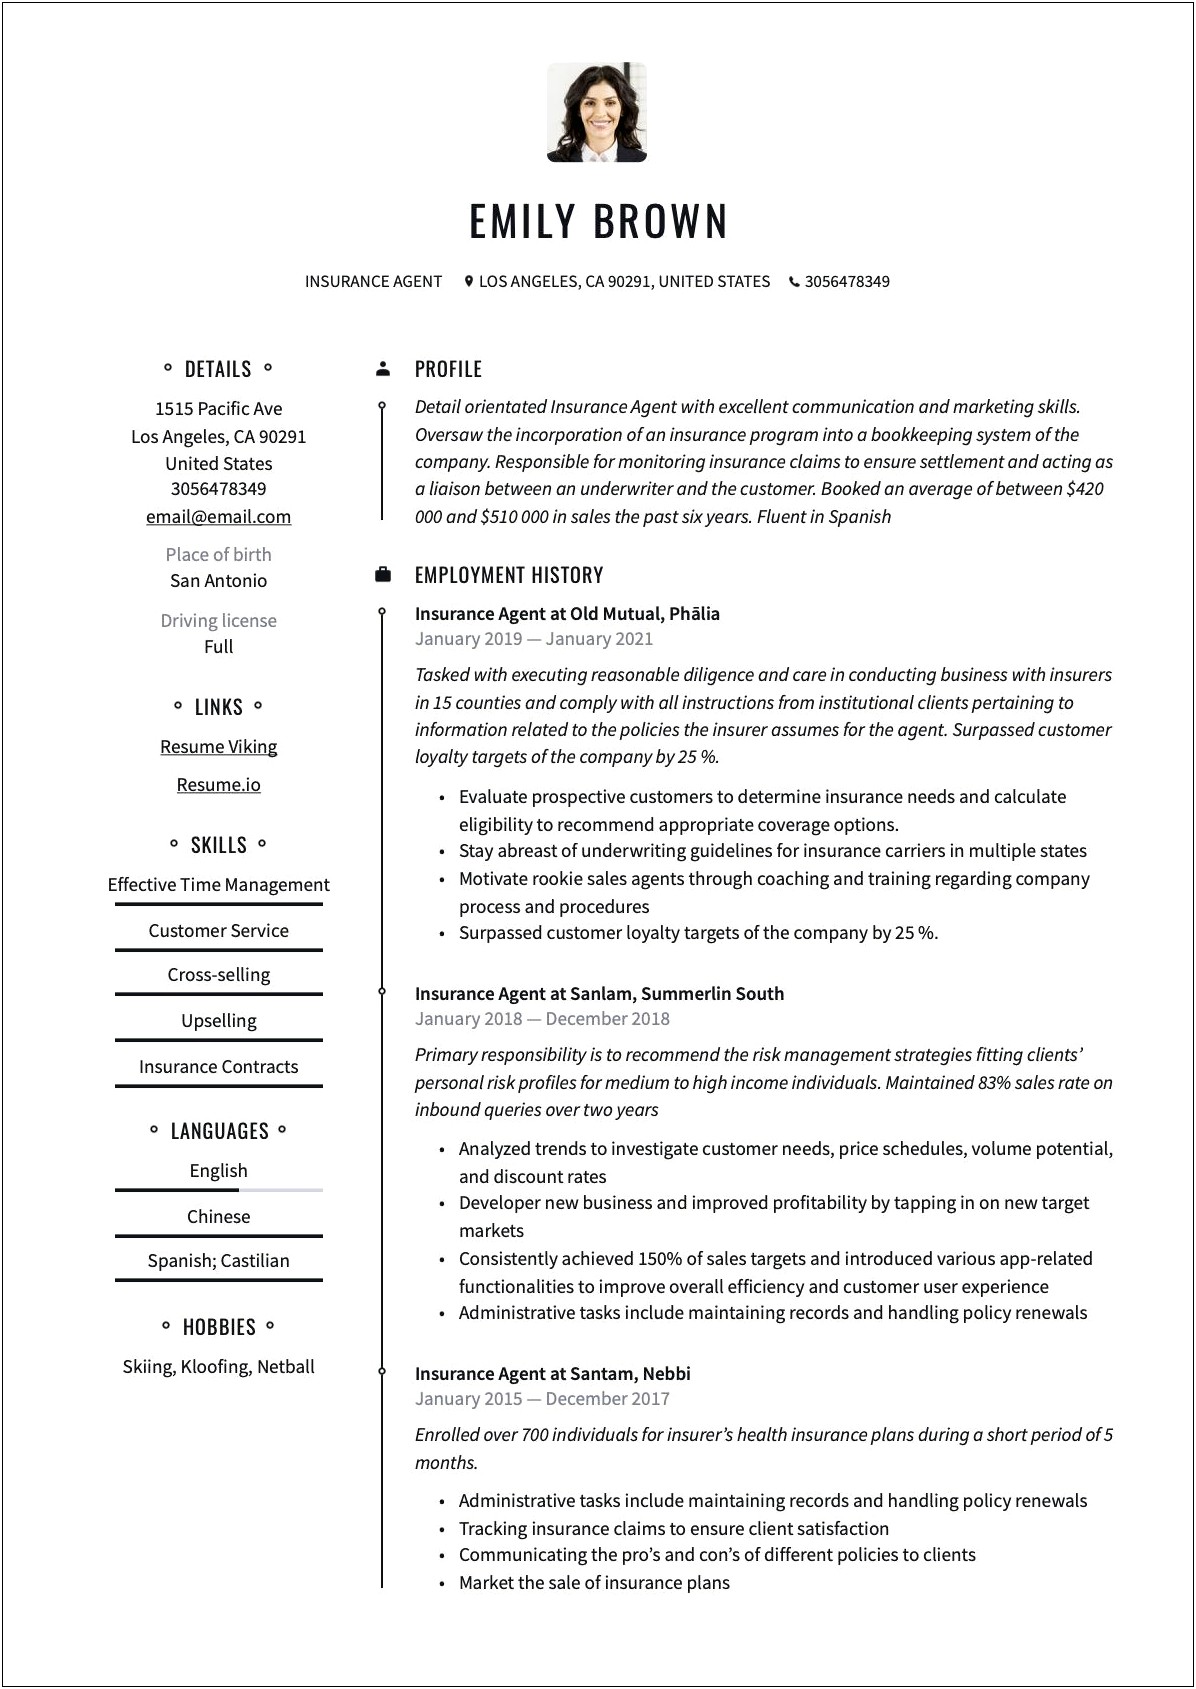 Sample Resume Of Life Insurance And Retirement Agent